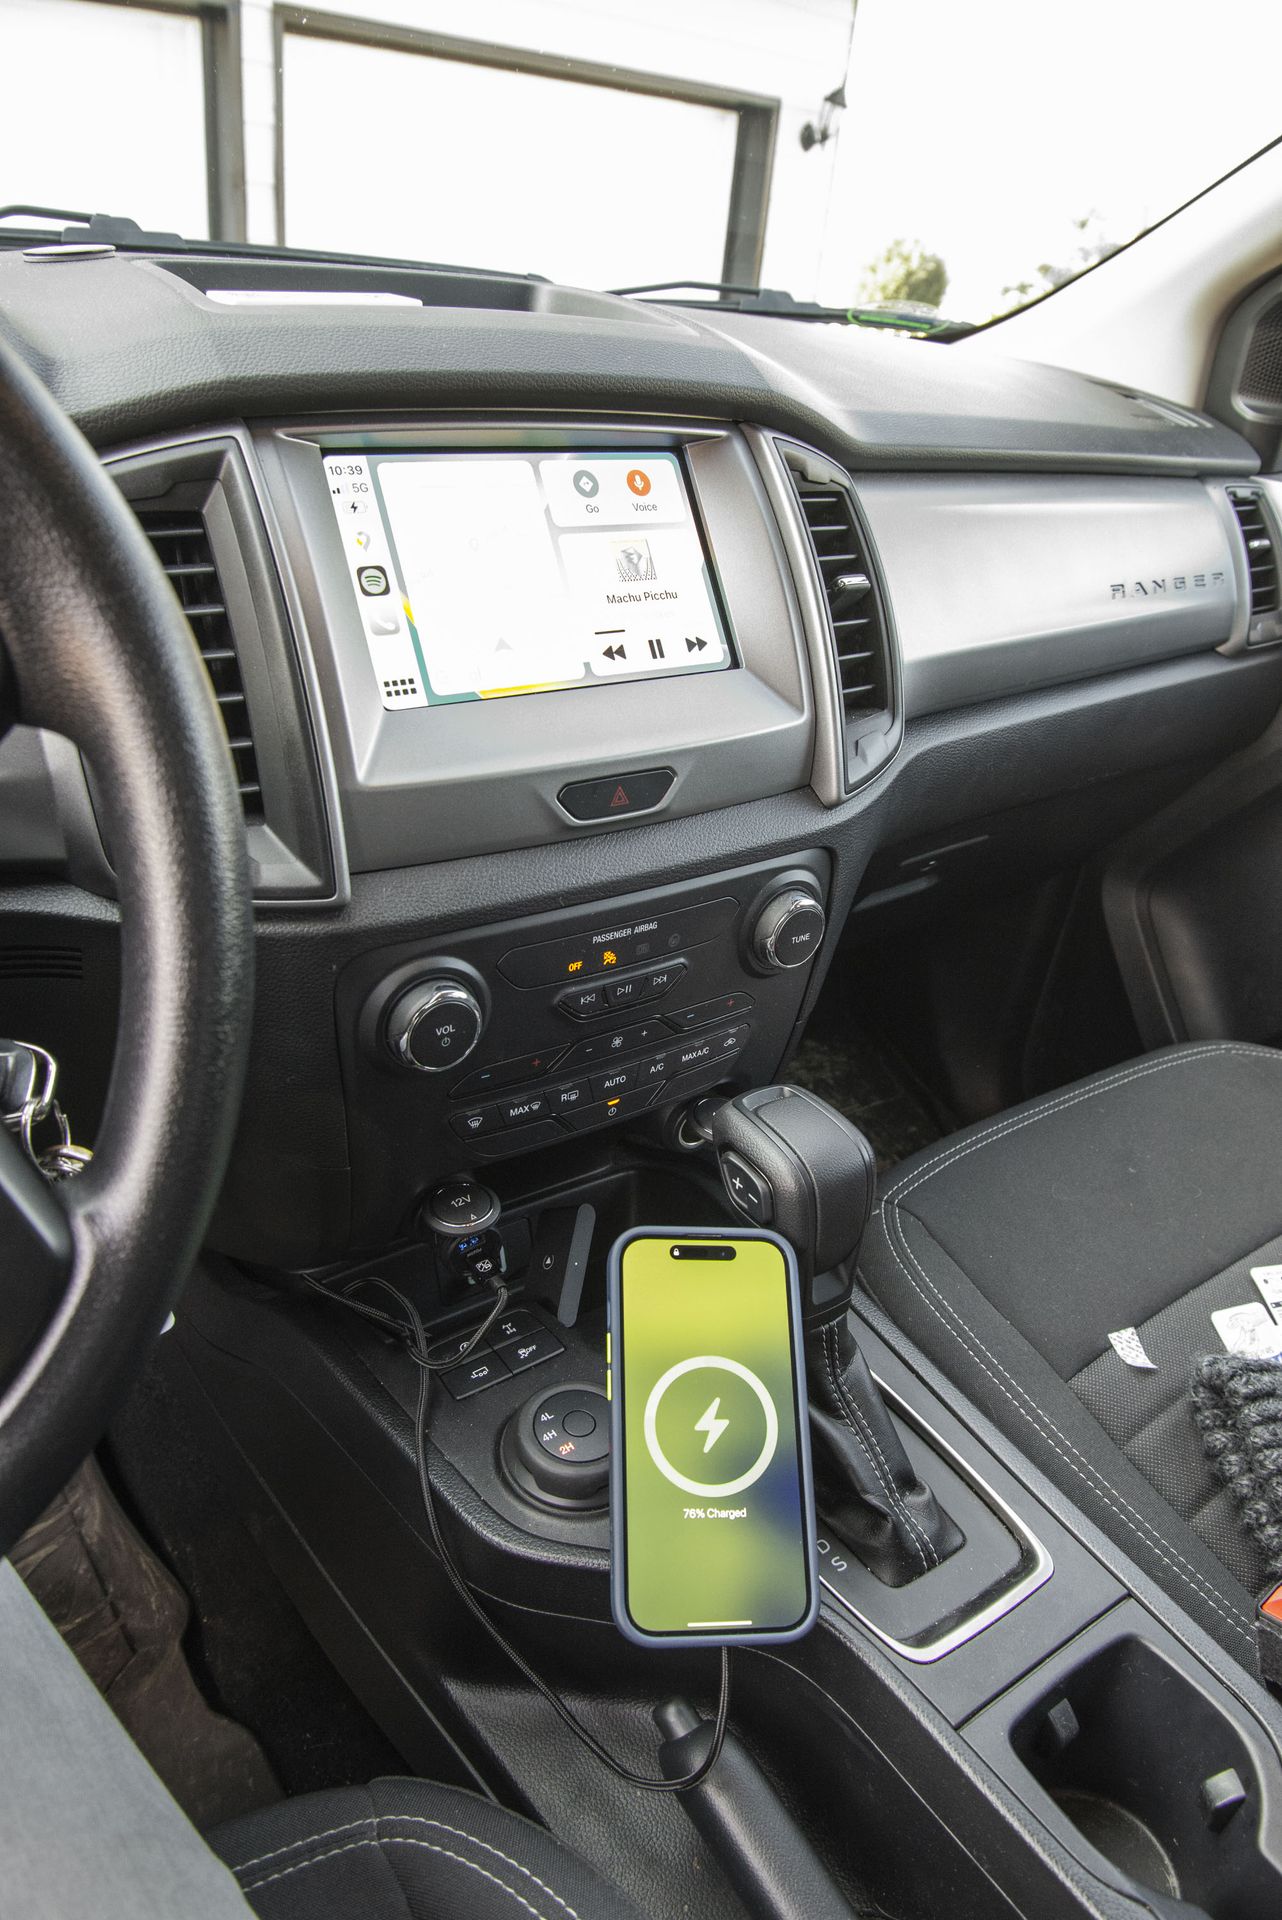 phone charging on Mob Armor mount inside vehicle